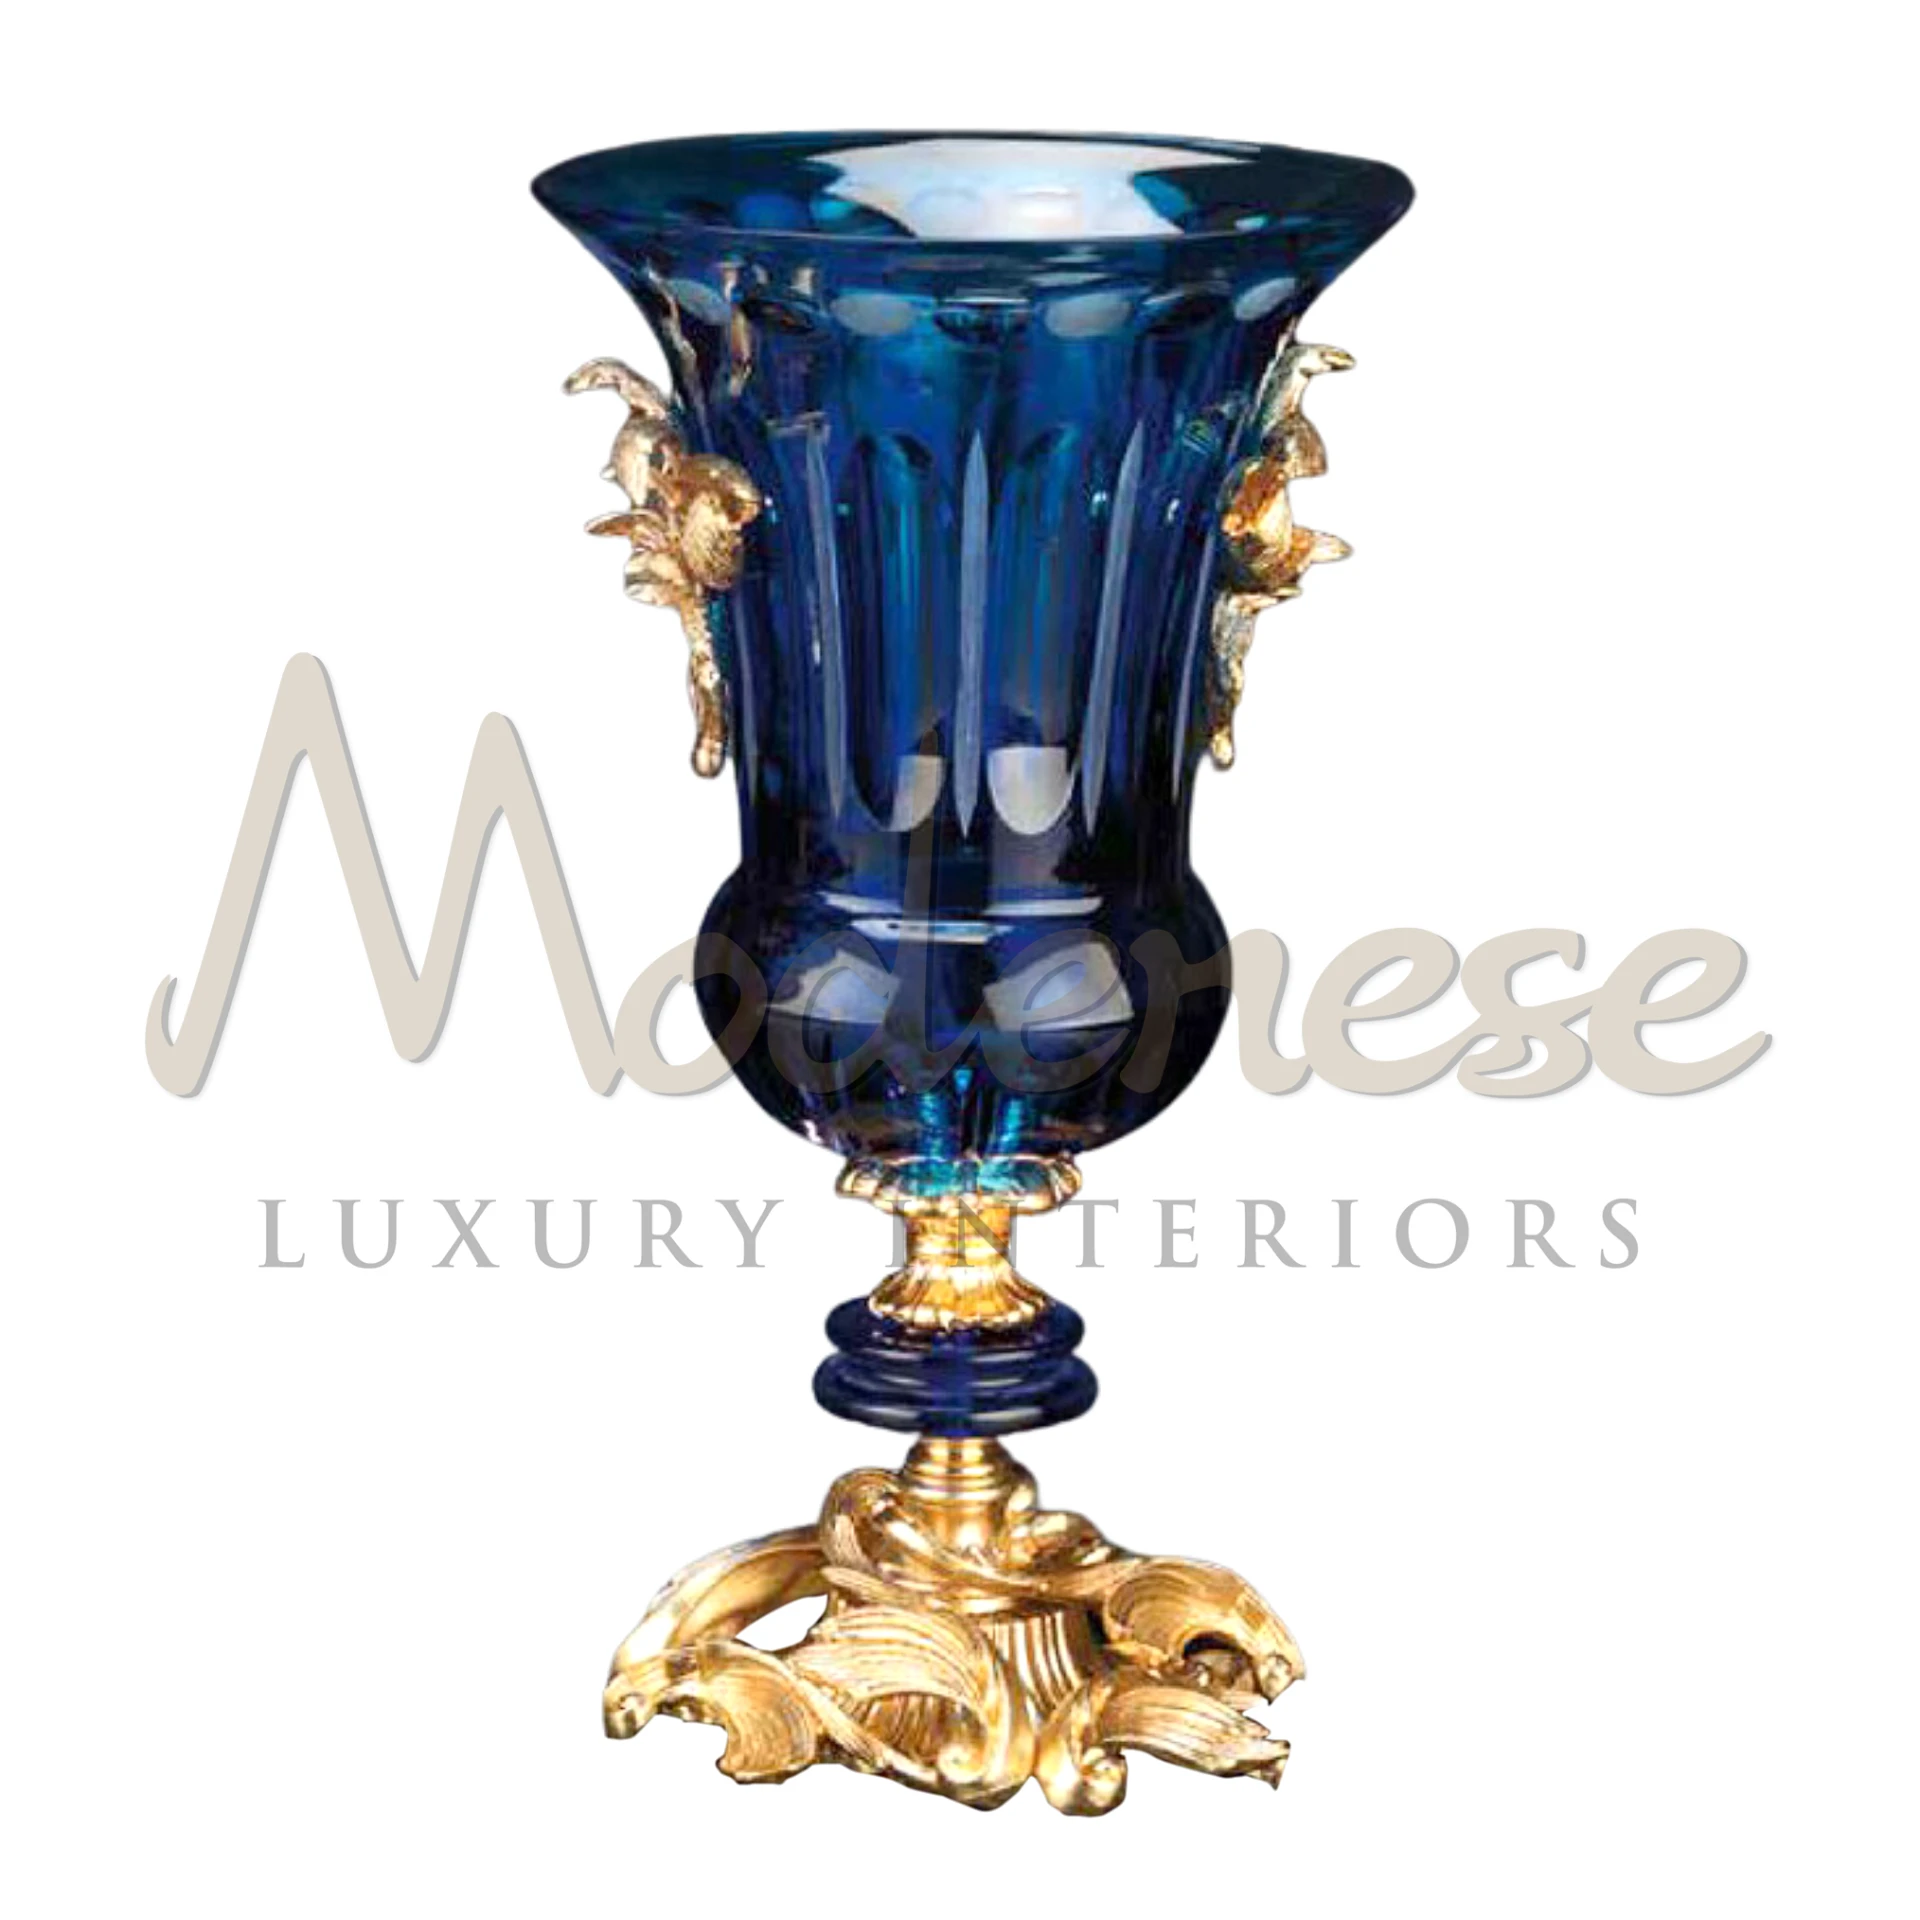 Stylish Royal Blue Vase in glass or ceramic, radiating sophistication and elegance, a bold and captivating decor choice for luxury interior design enthusiasts.






